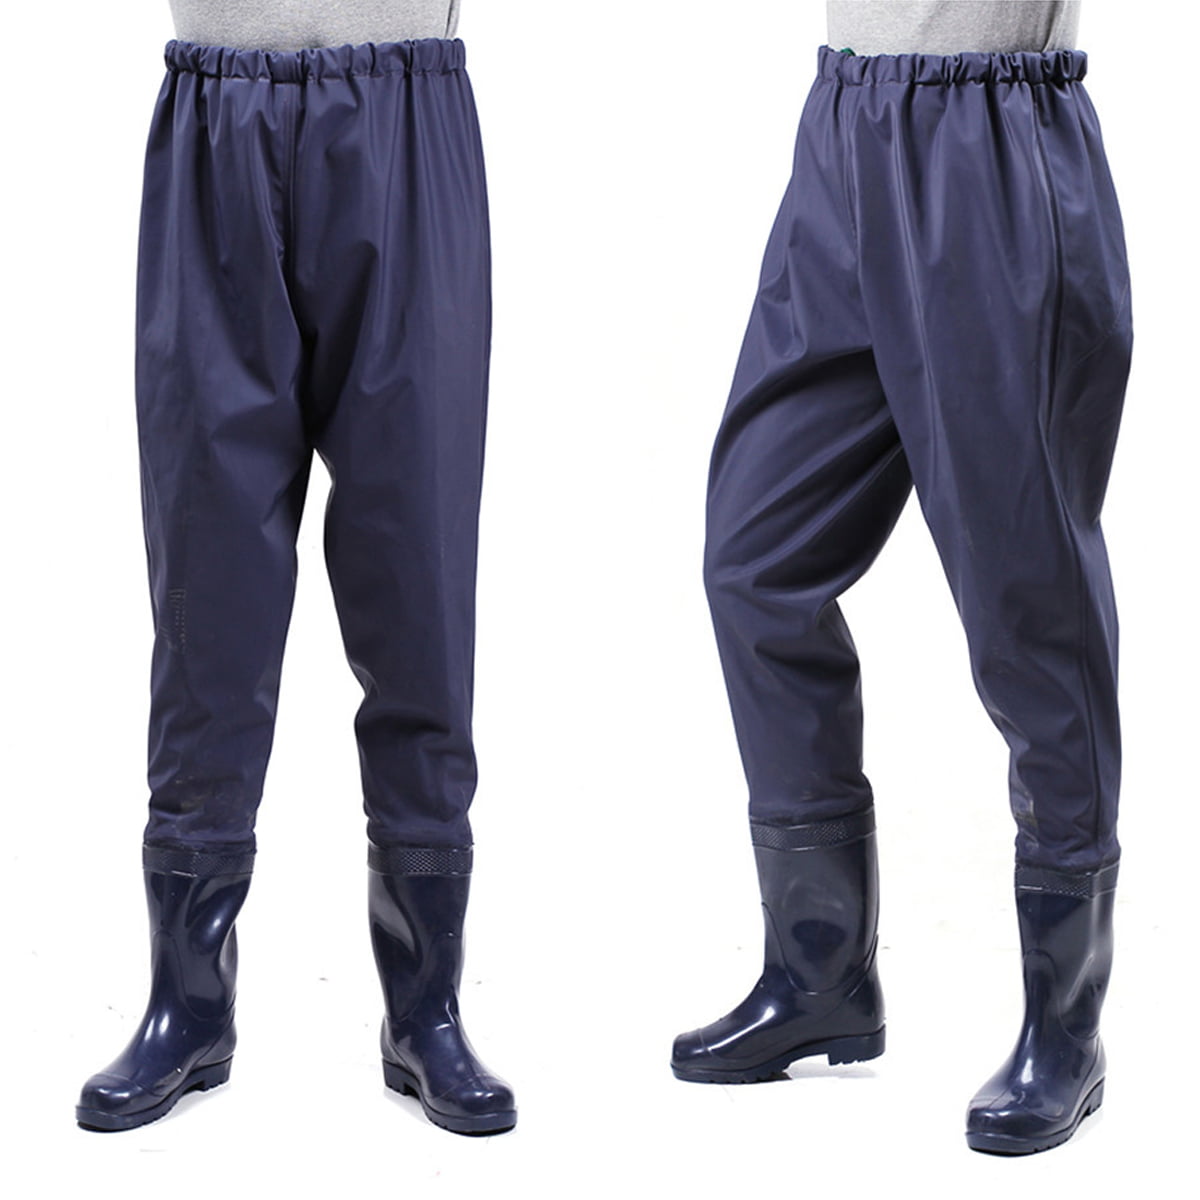 Outdoor Catch fish Waterproof Fishing Hunting Water Boot Wading Pants Overalls 